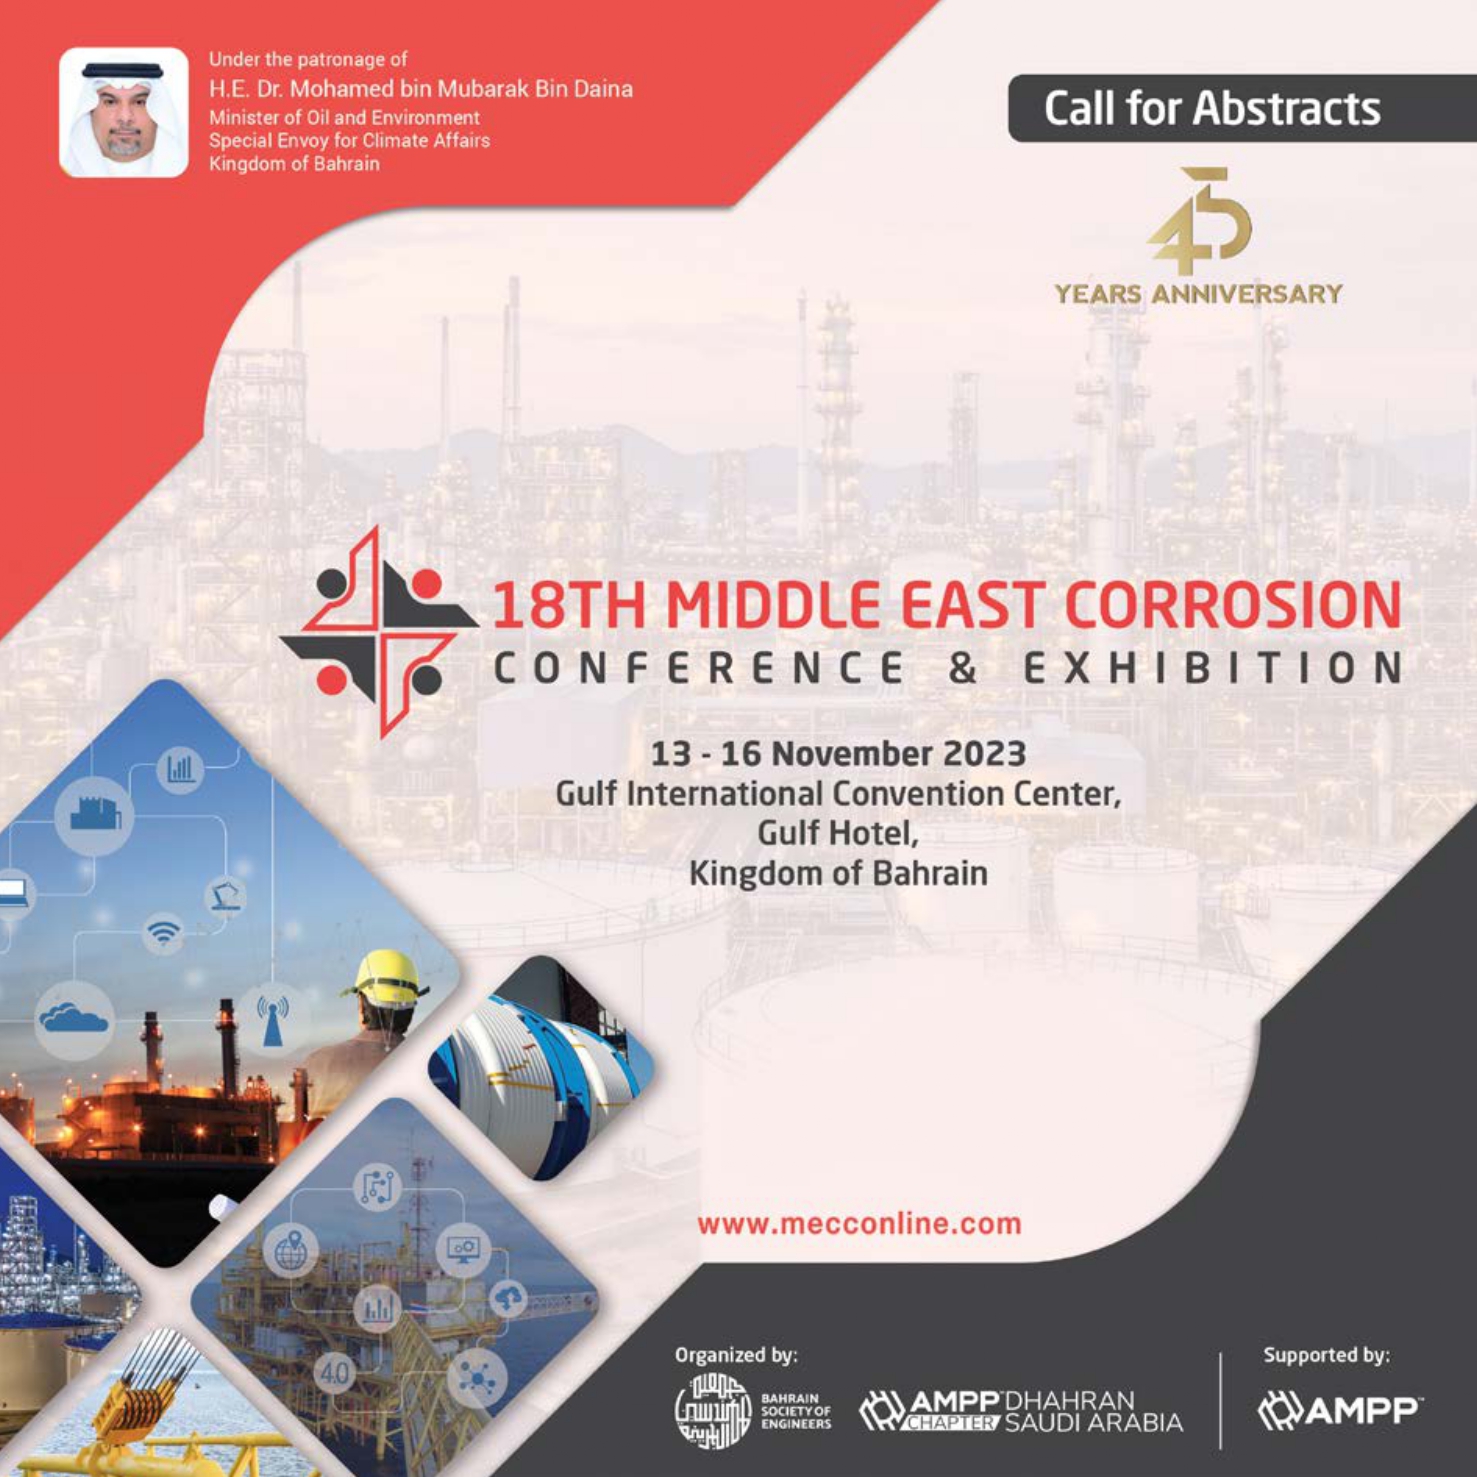 18th Middle East Corrosion Conference & Exhibition